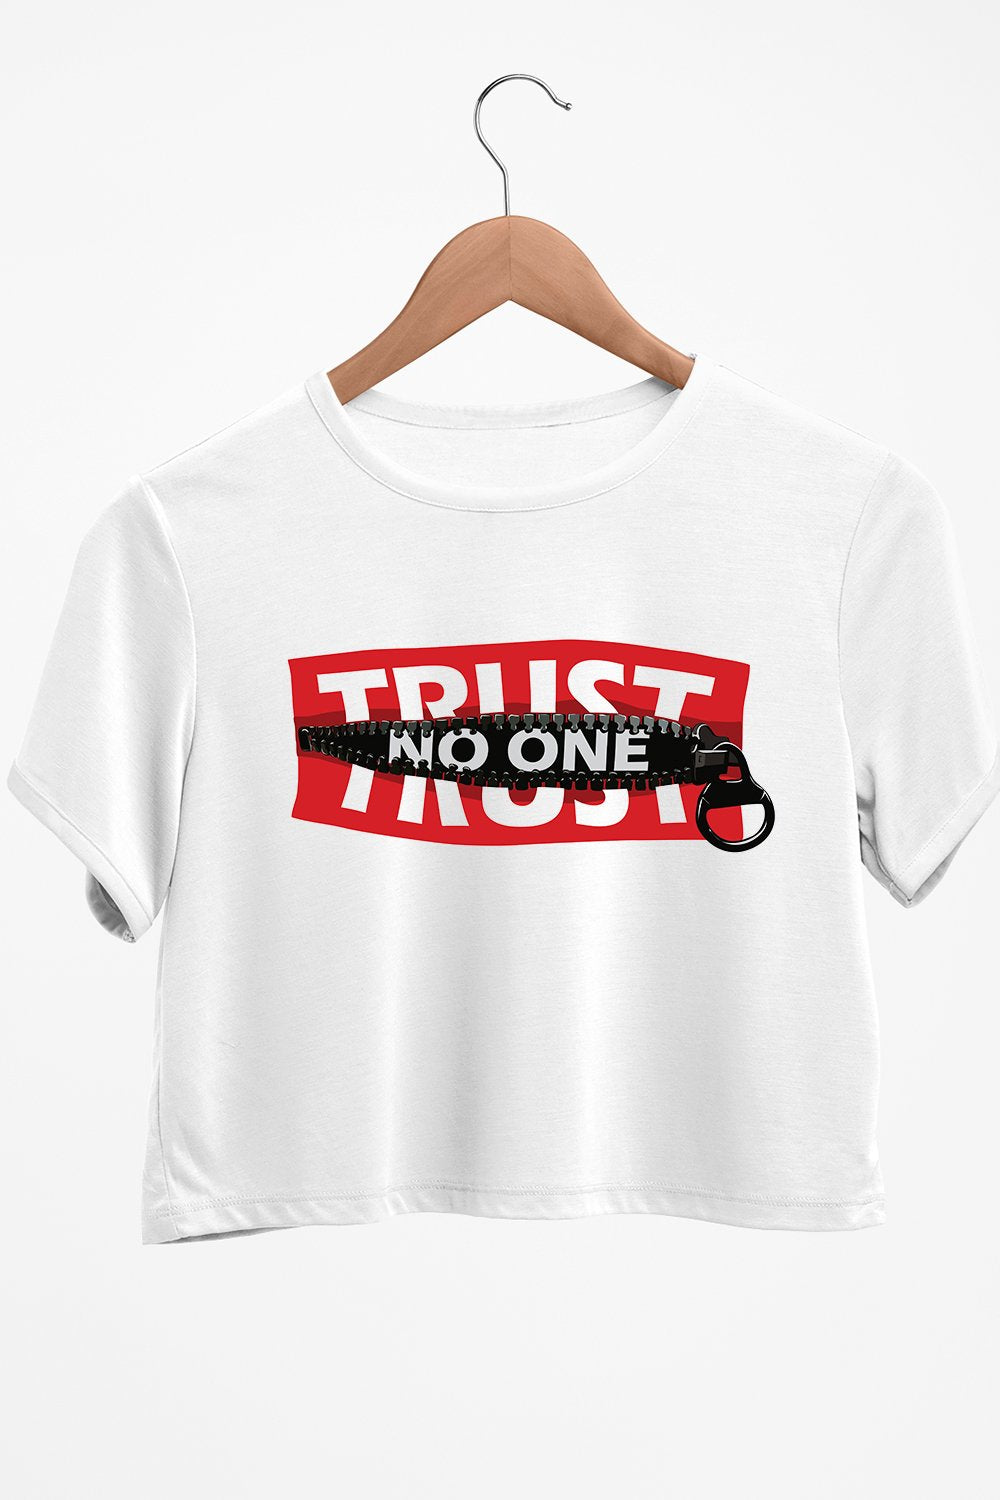 Trust No One Graphic Printed White Crop Top